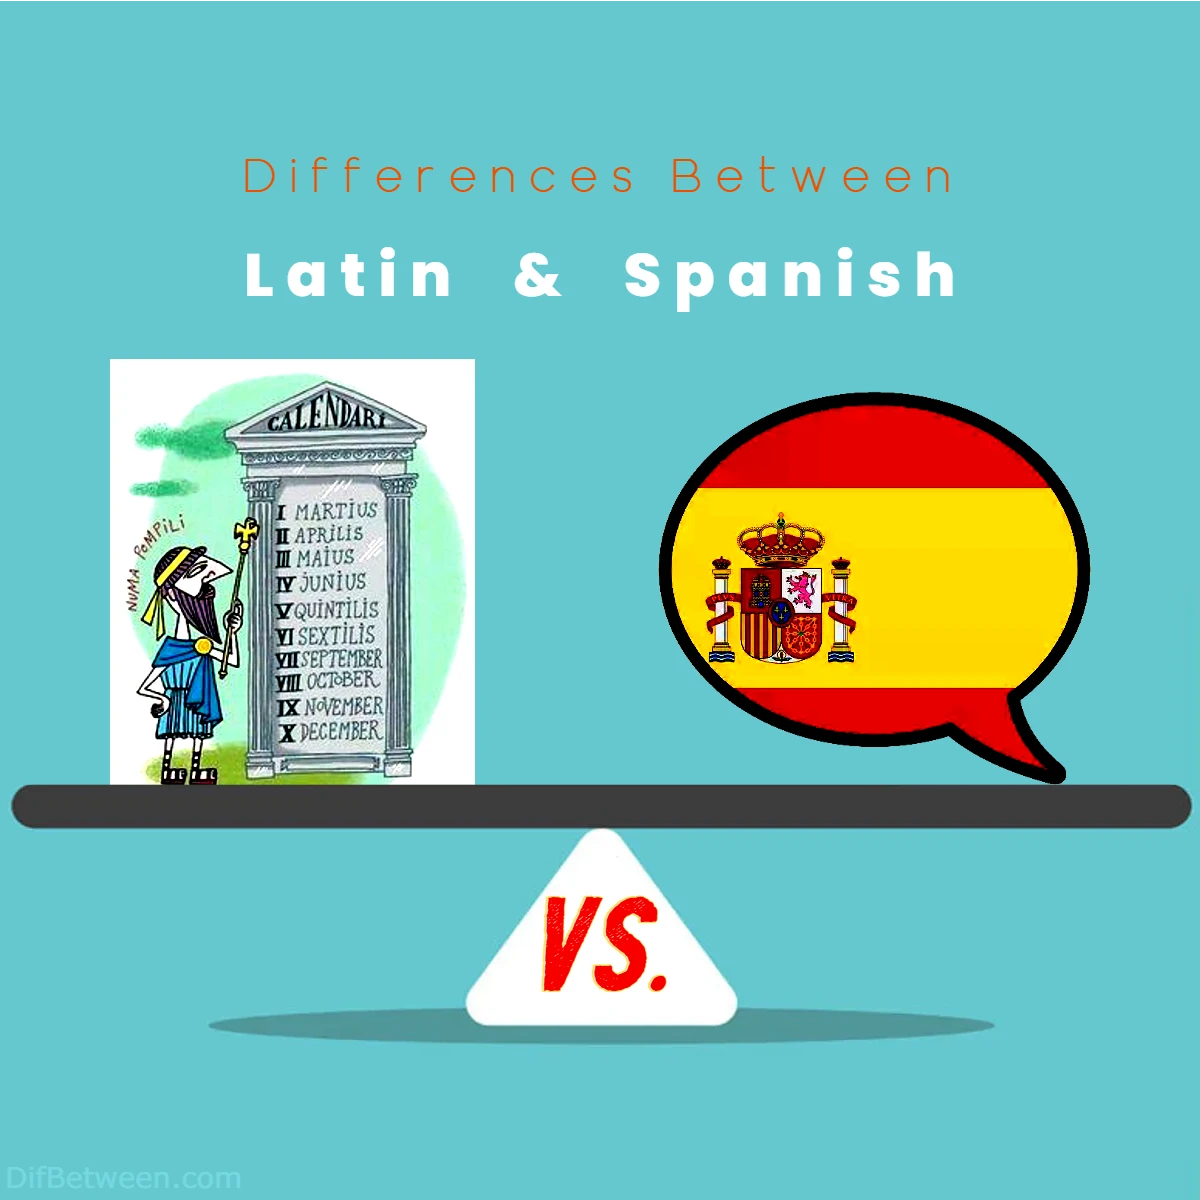 Differences Between Latin vs Spanish